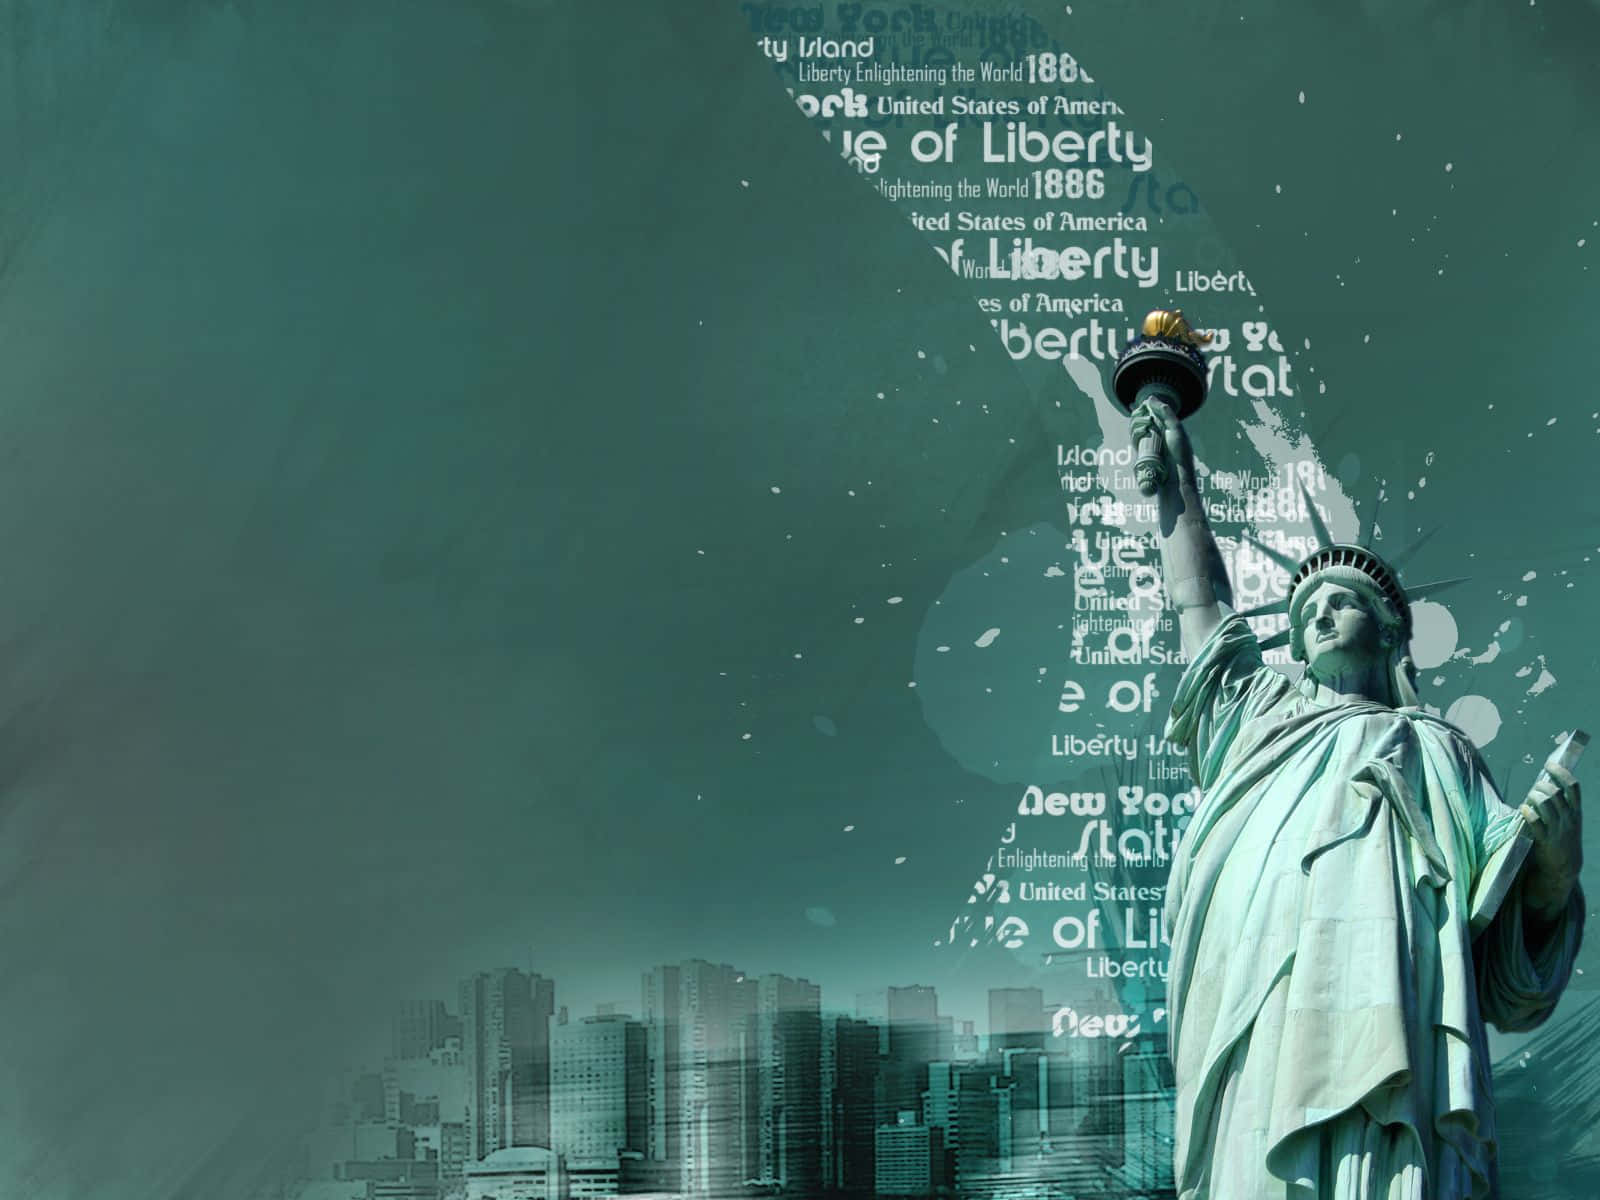 A Statue Of Liberty With Words Written On It